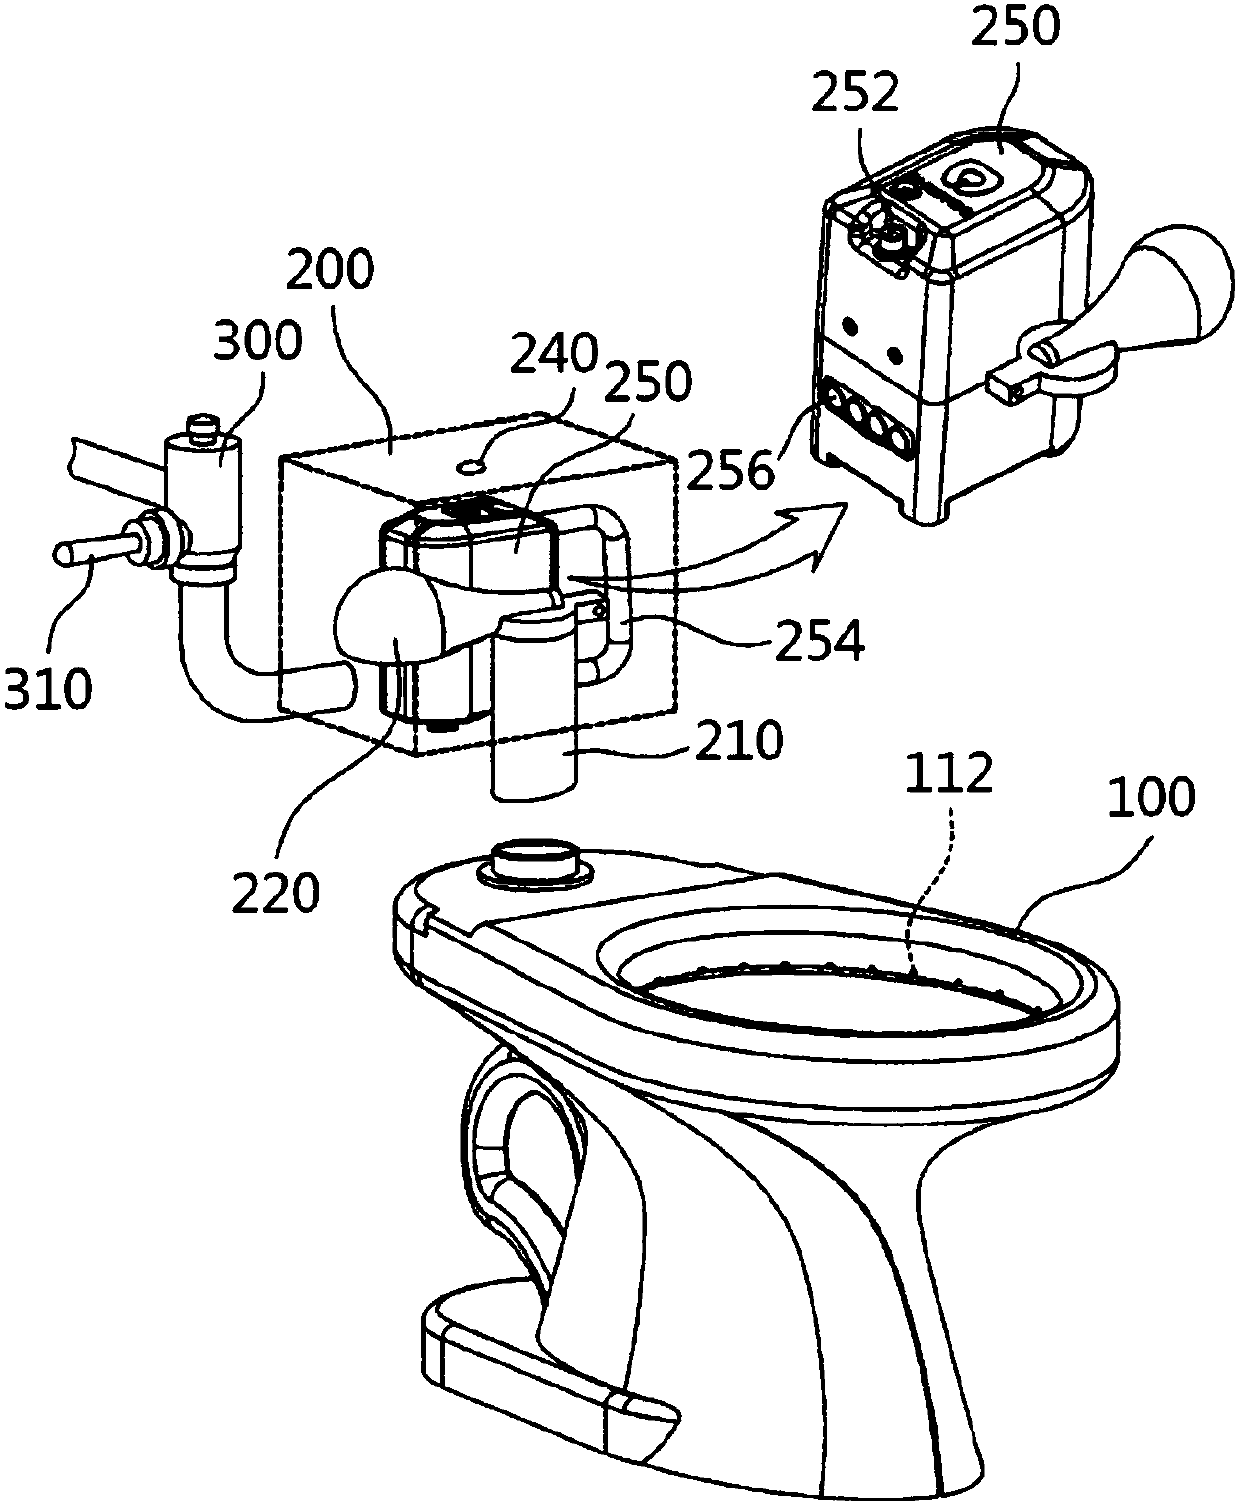 Apparatus for removing bad odor from toilet